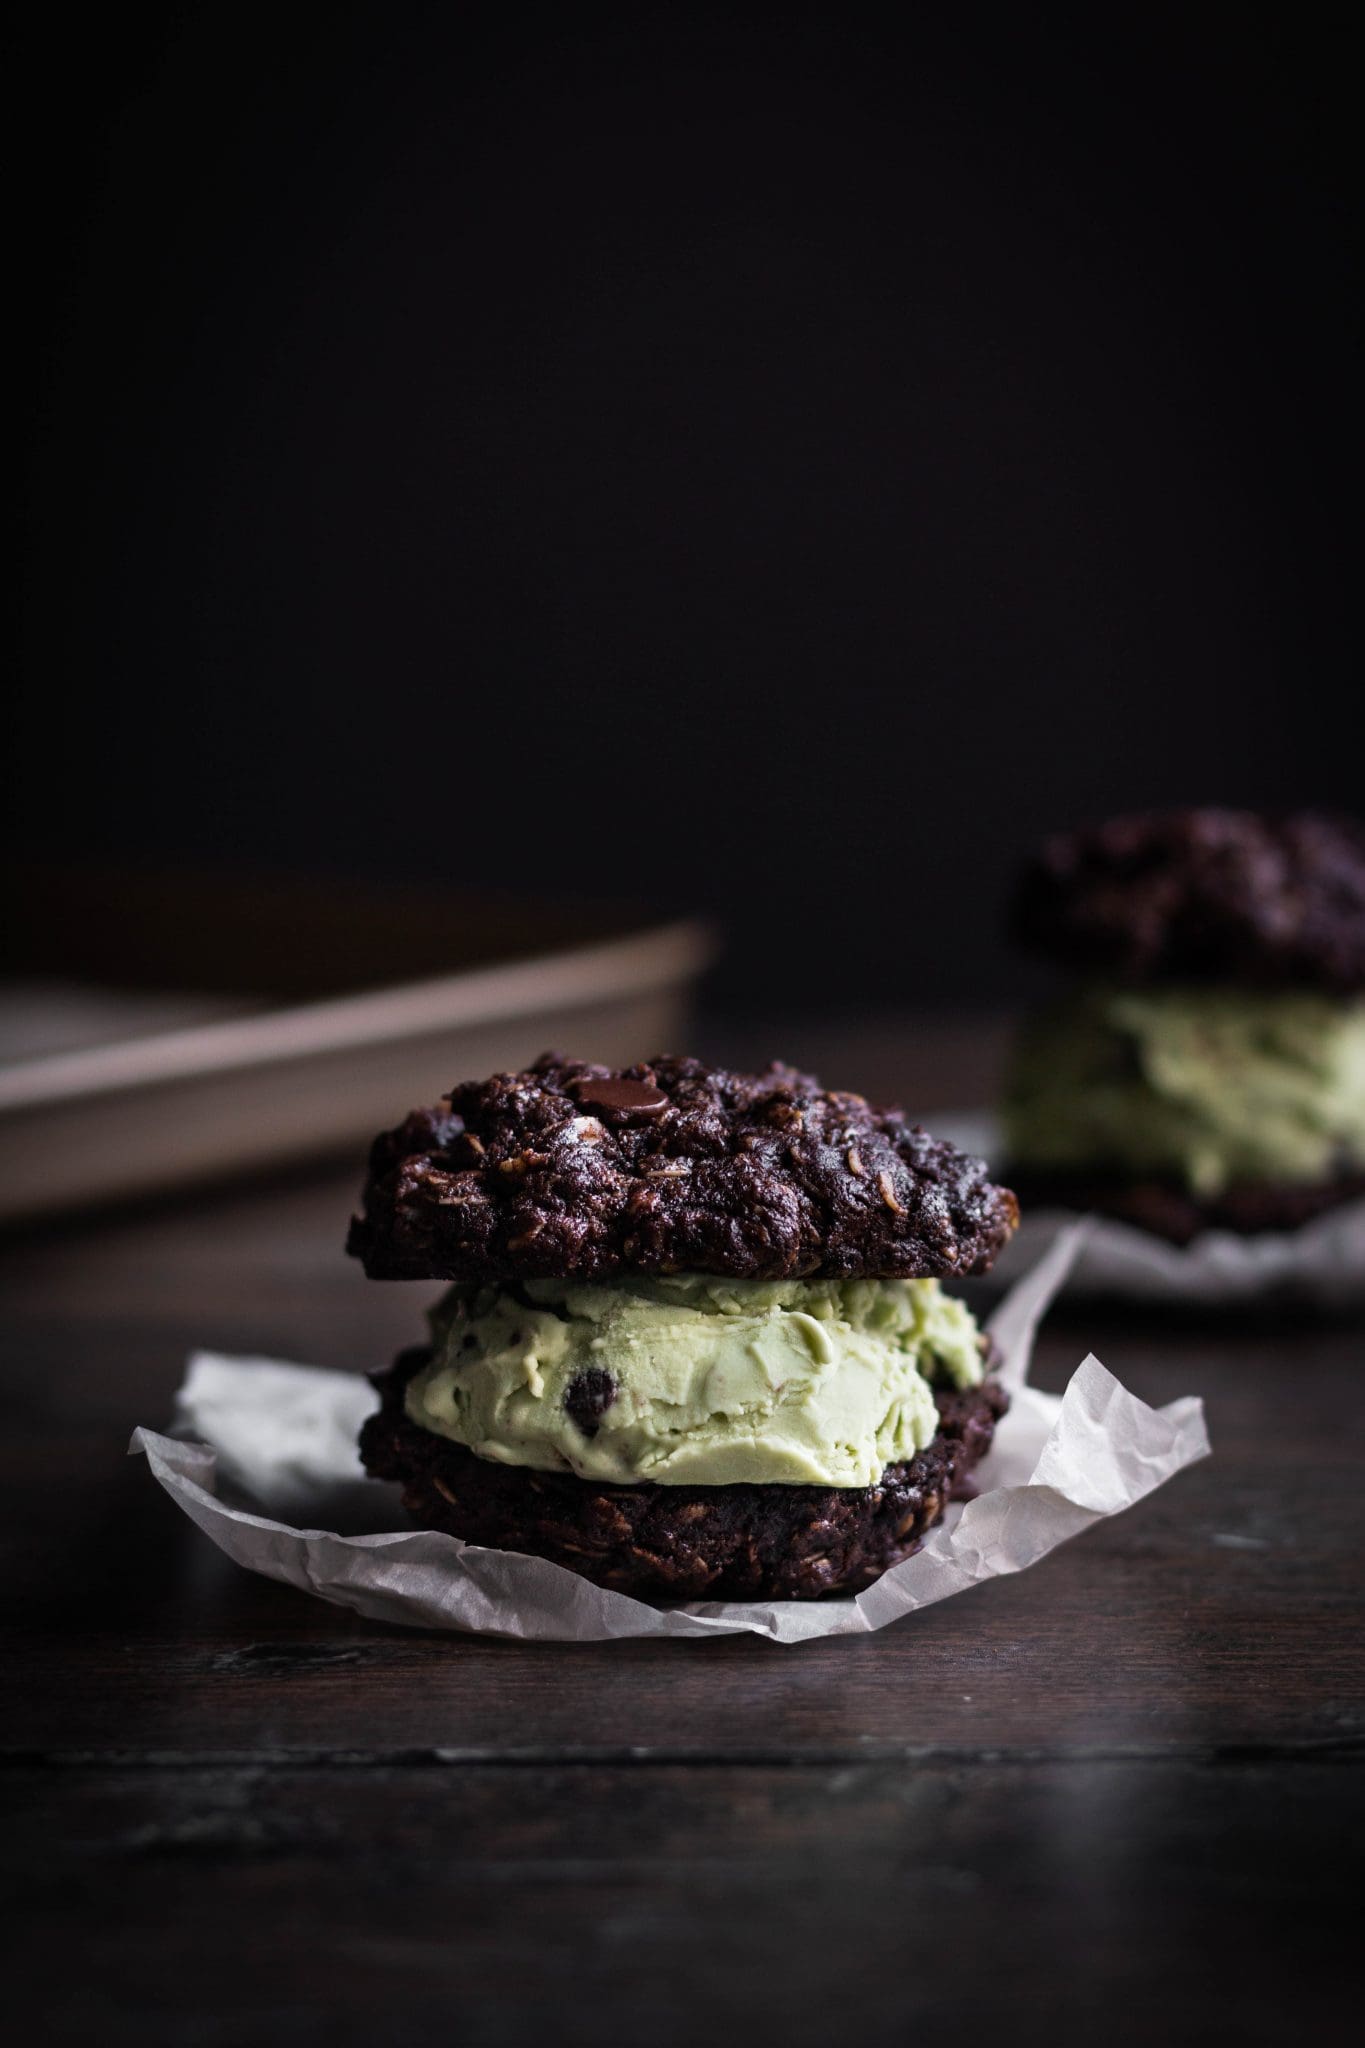 mint chocolate ice cream sandwiches seen from the side